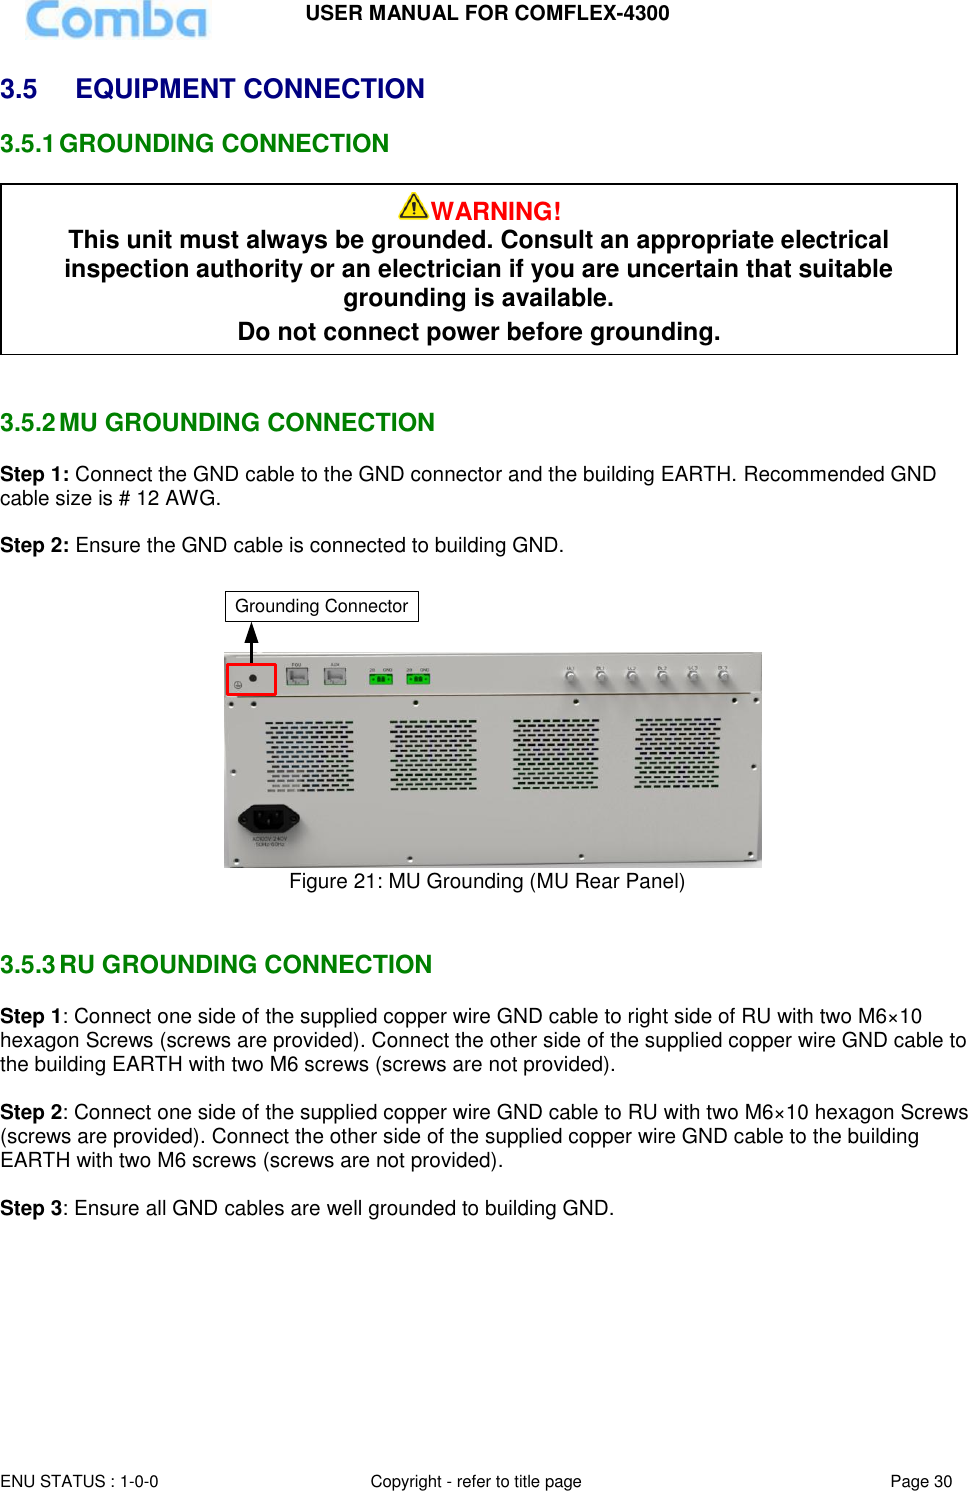 USER MANUAL FOR COMFLEX-4300  ENU STATUS : 1-0-0 Copyright - refer to title page Page 30     3.5  EQUIPMENT CONNECTION  3.5.1 GROUNDING CONNECTION    3.5.2 MU GROUNDING CONNECTION Step 1: Connect the GND cable to the GND connector and the building EARTH. Recommended GND cable size is # 12 AWG.  Step 2: Ensure the GND cable is connected to building GND.  Grounding Connector Figure 21: MU Grounding (MU Rear Panel)   3.5.3 RU GROUNDING CONNECTION Step 1: Connect one side of the supplied copper wire GND cable to right side of RU with two M6×10 hexagon Screws (screws are provided). Connect the other side of the supplied copper wire GND cable to the building EARTH with two M6 screws (screws are not provided).  Step 2: Connect one side of the supplied copper wire GND cable to RU with two M6×10 hexagon Screws (screws are provided). Connect the other side of the supplied copper wire GND cable to the building EARTH with two M6 screws (screws are not provided).  Step 3: Ensure all GND cables are well grounded to building GND.  WARNING! This unit must always be grounded. Consult an appropriate electrical inspection authority or an electrician if you are uncertain that suitable grounding is available.   Do not connect power before grounding. 